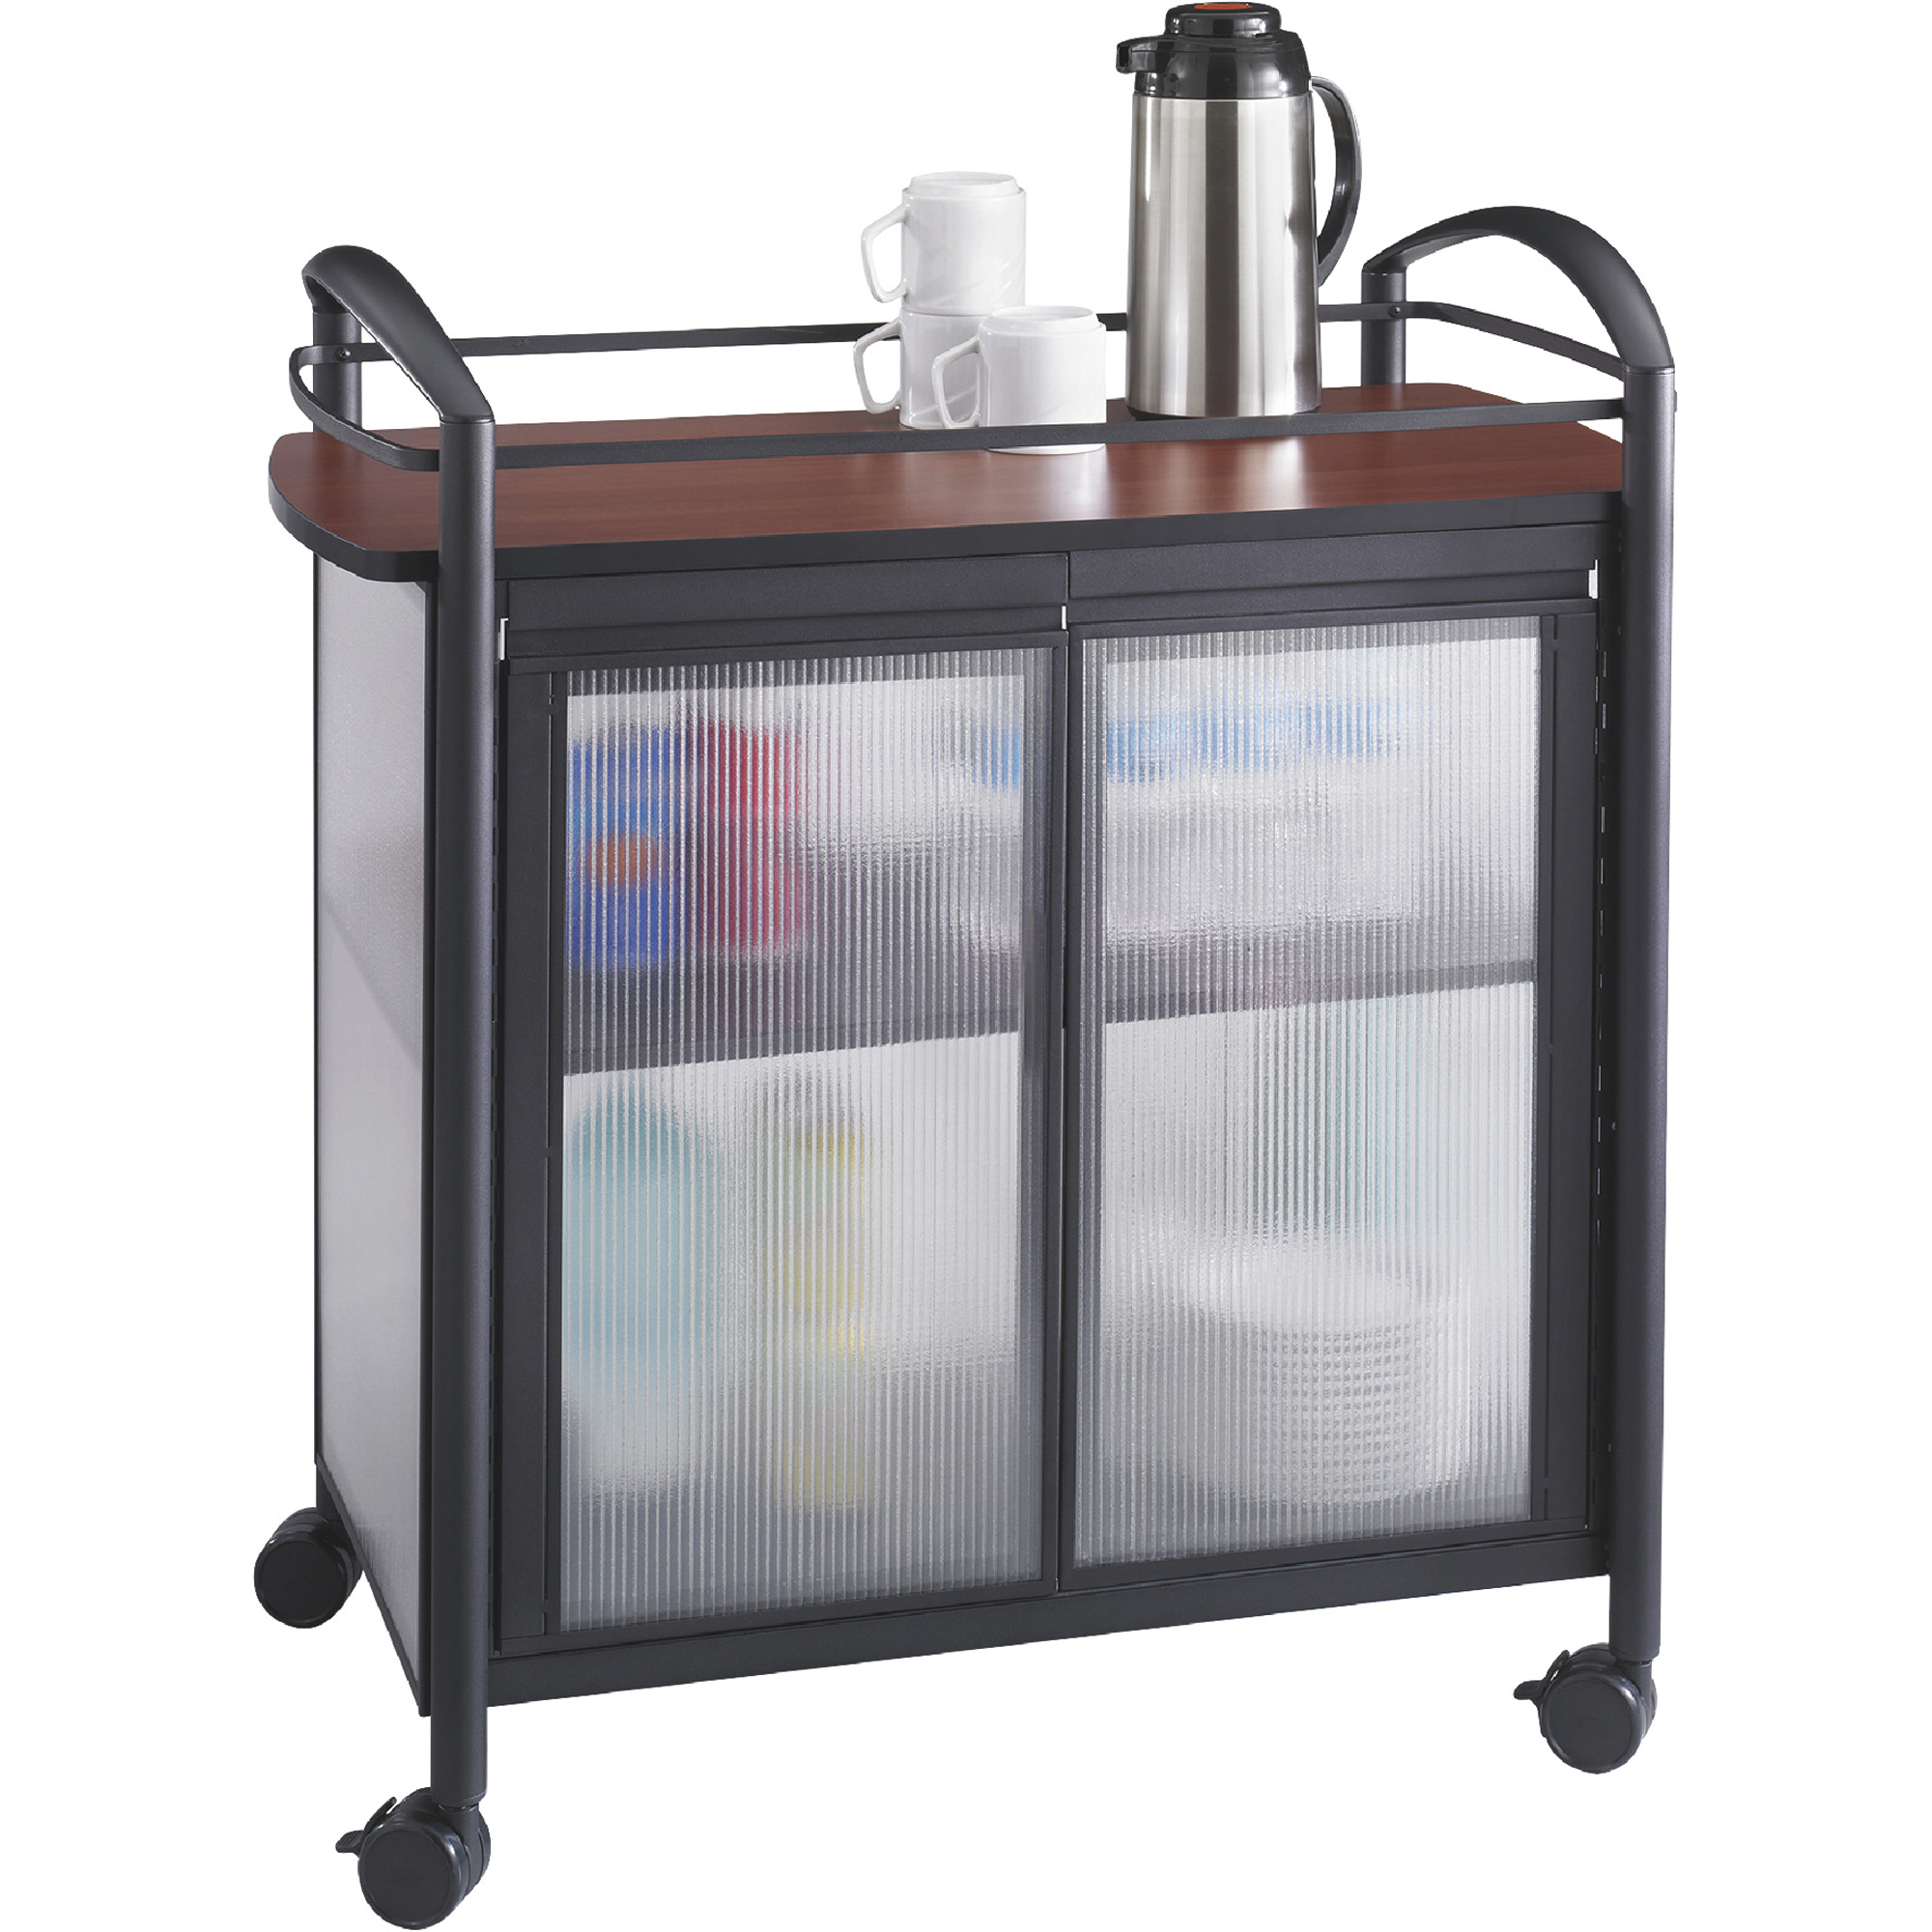 Safco Impromptu Mobile Refreshment Center — Black, 23Inch W x 31Inch H x 18Inch D, Model 8966BL -  SAFCO Products